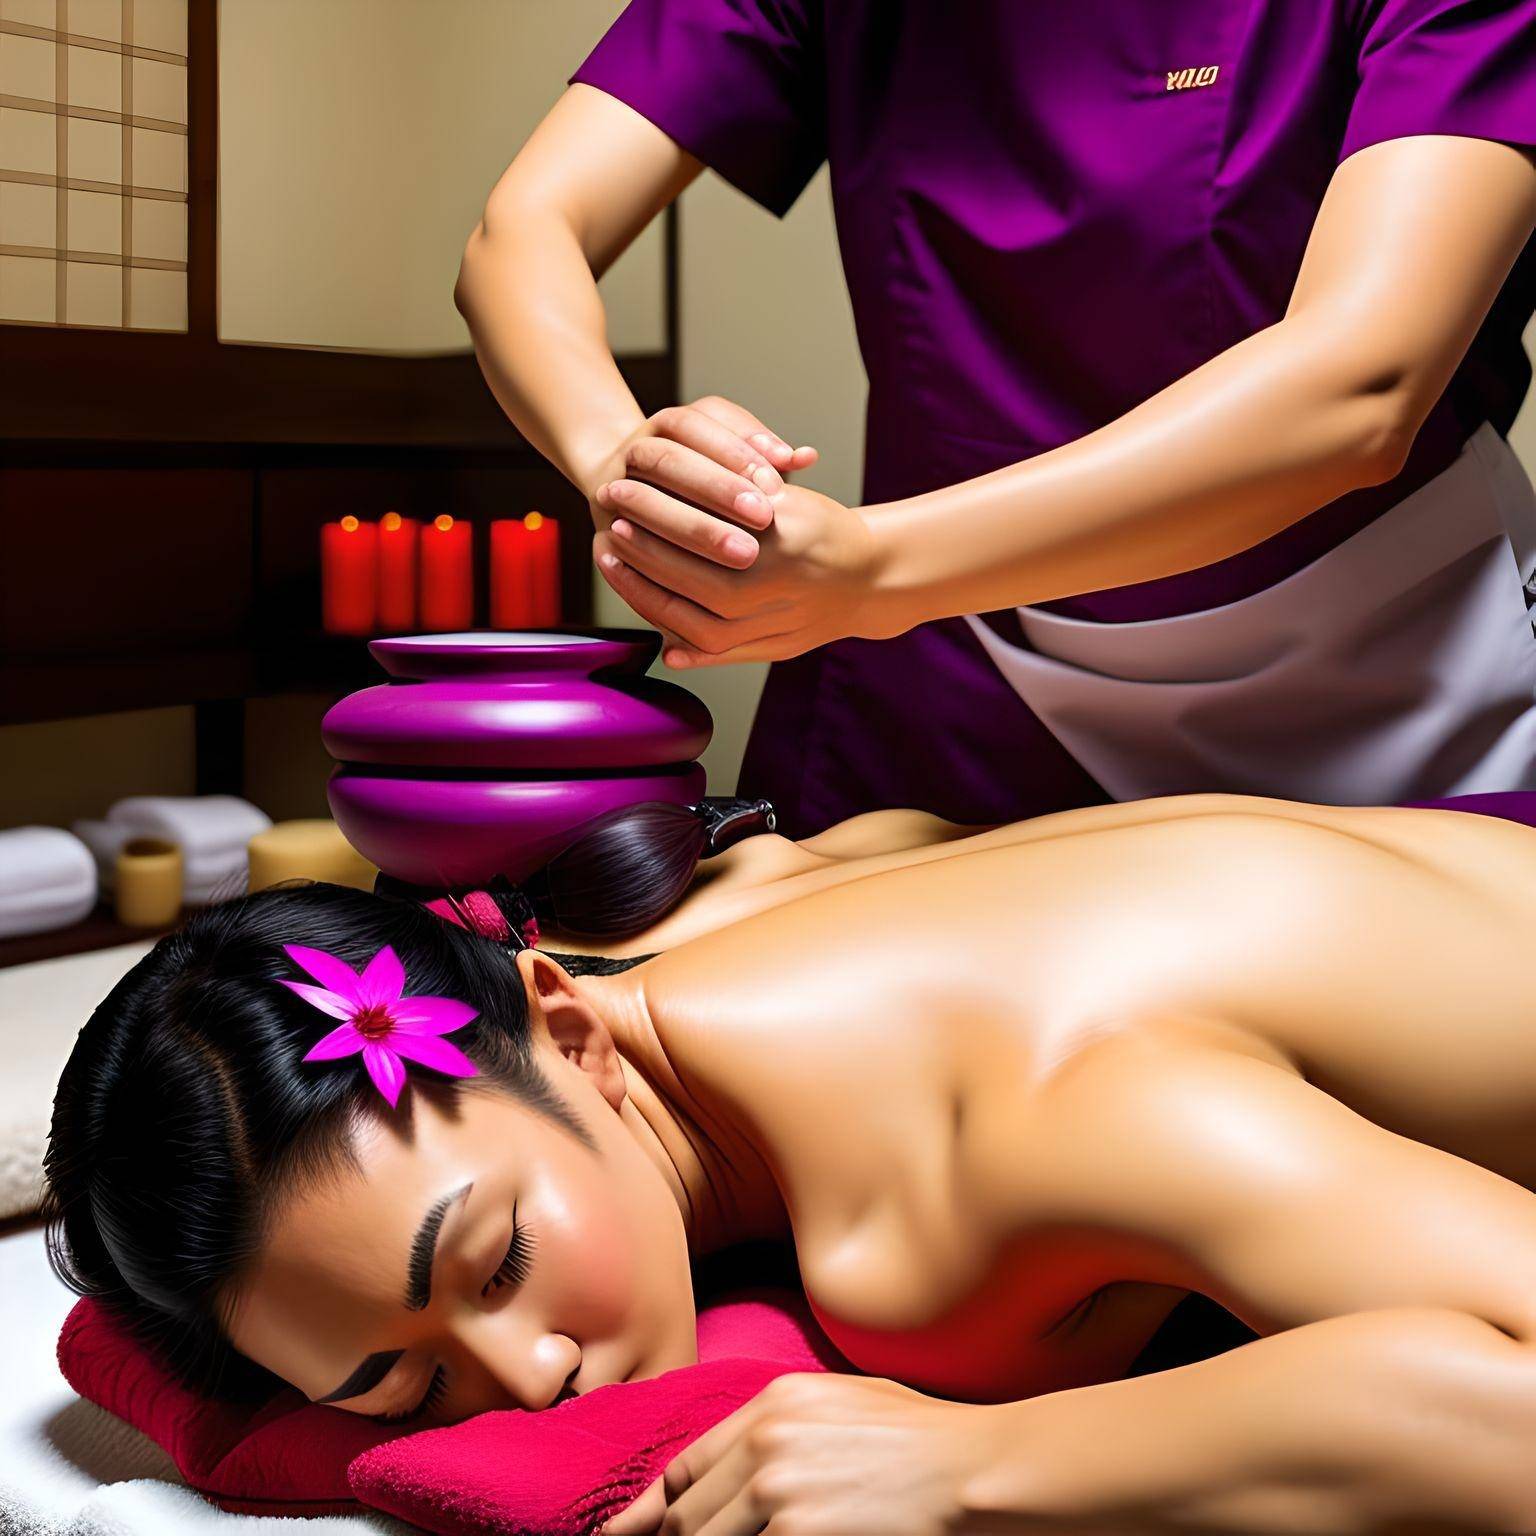 Intervenere Æsel møde On-Demand Massage In Malaysia : Japanese Massage - Malaysian Review